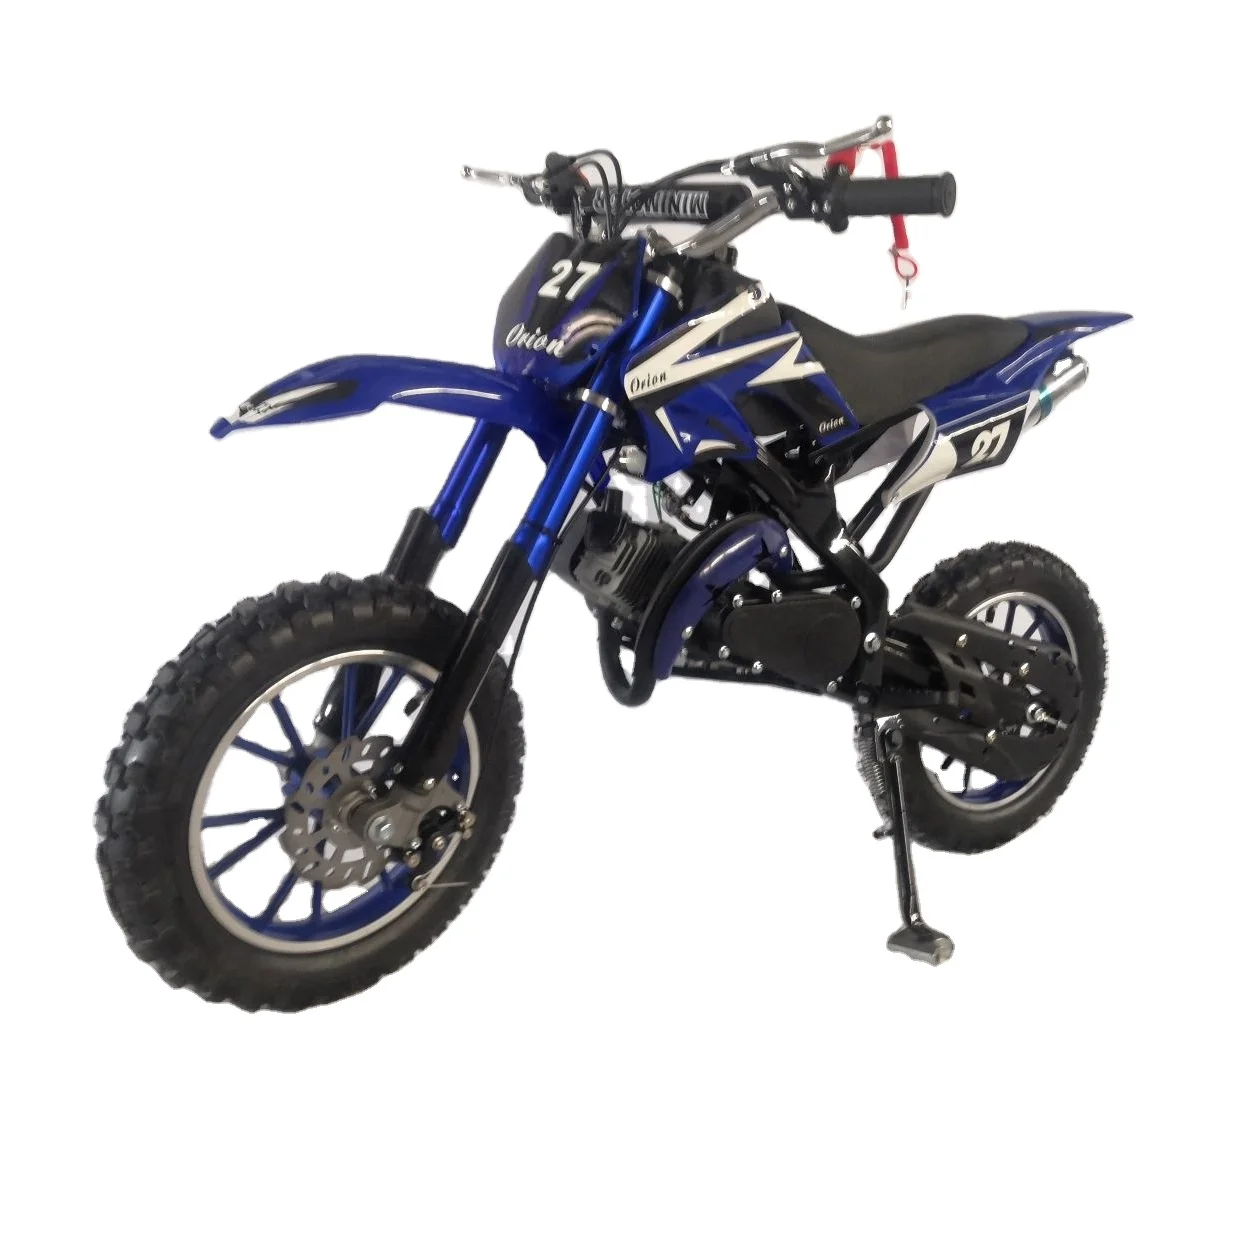 

New fashion 2-stroke mini dirt bikes pull start gas mini motorcycle 49cc for kids with CE